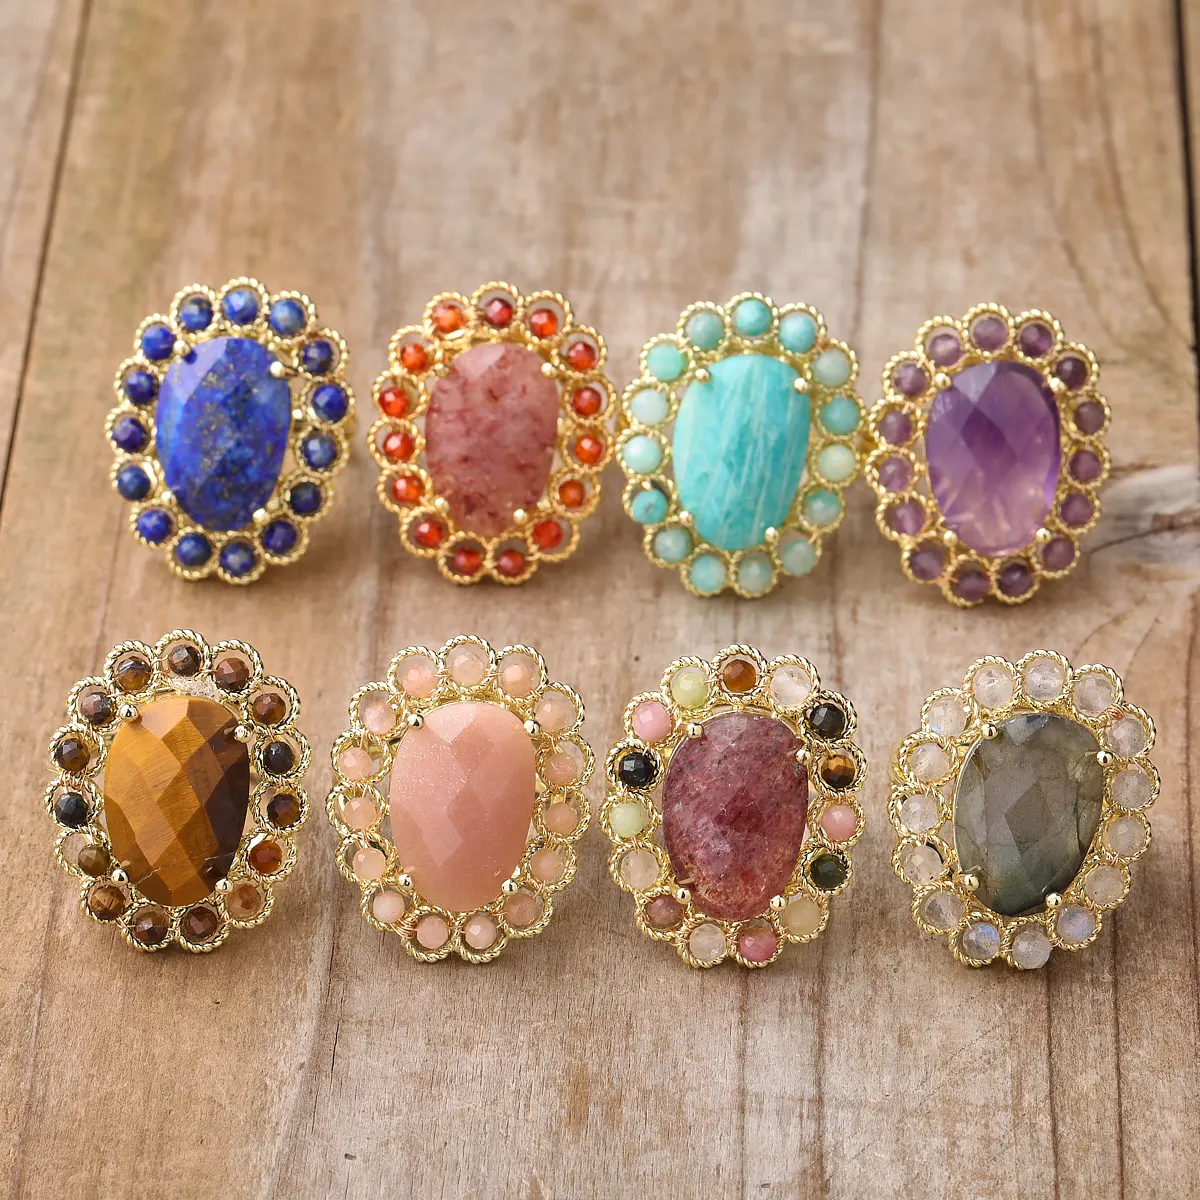 Fashion Women Statement Rings Bohemia Natural Stone Bead Adjustable Ring Designer Wedding Party Jewelry Gifts